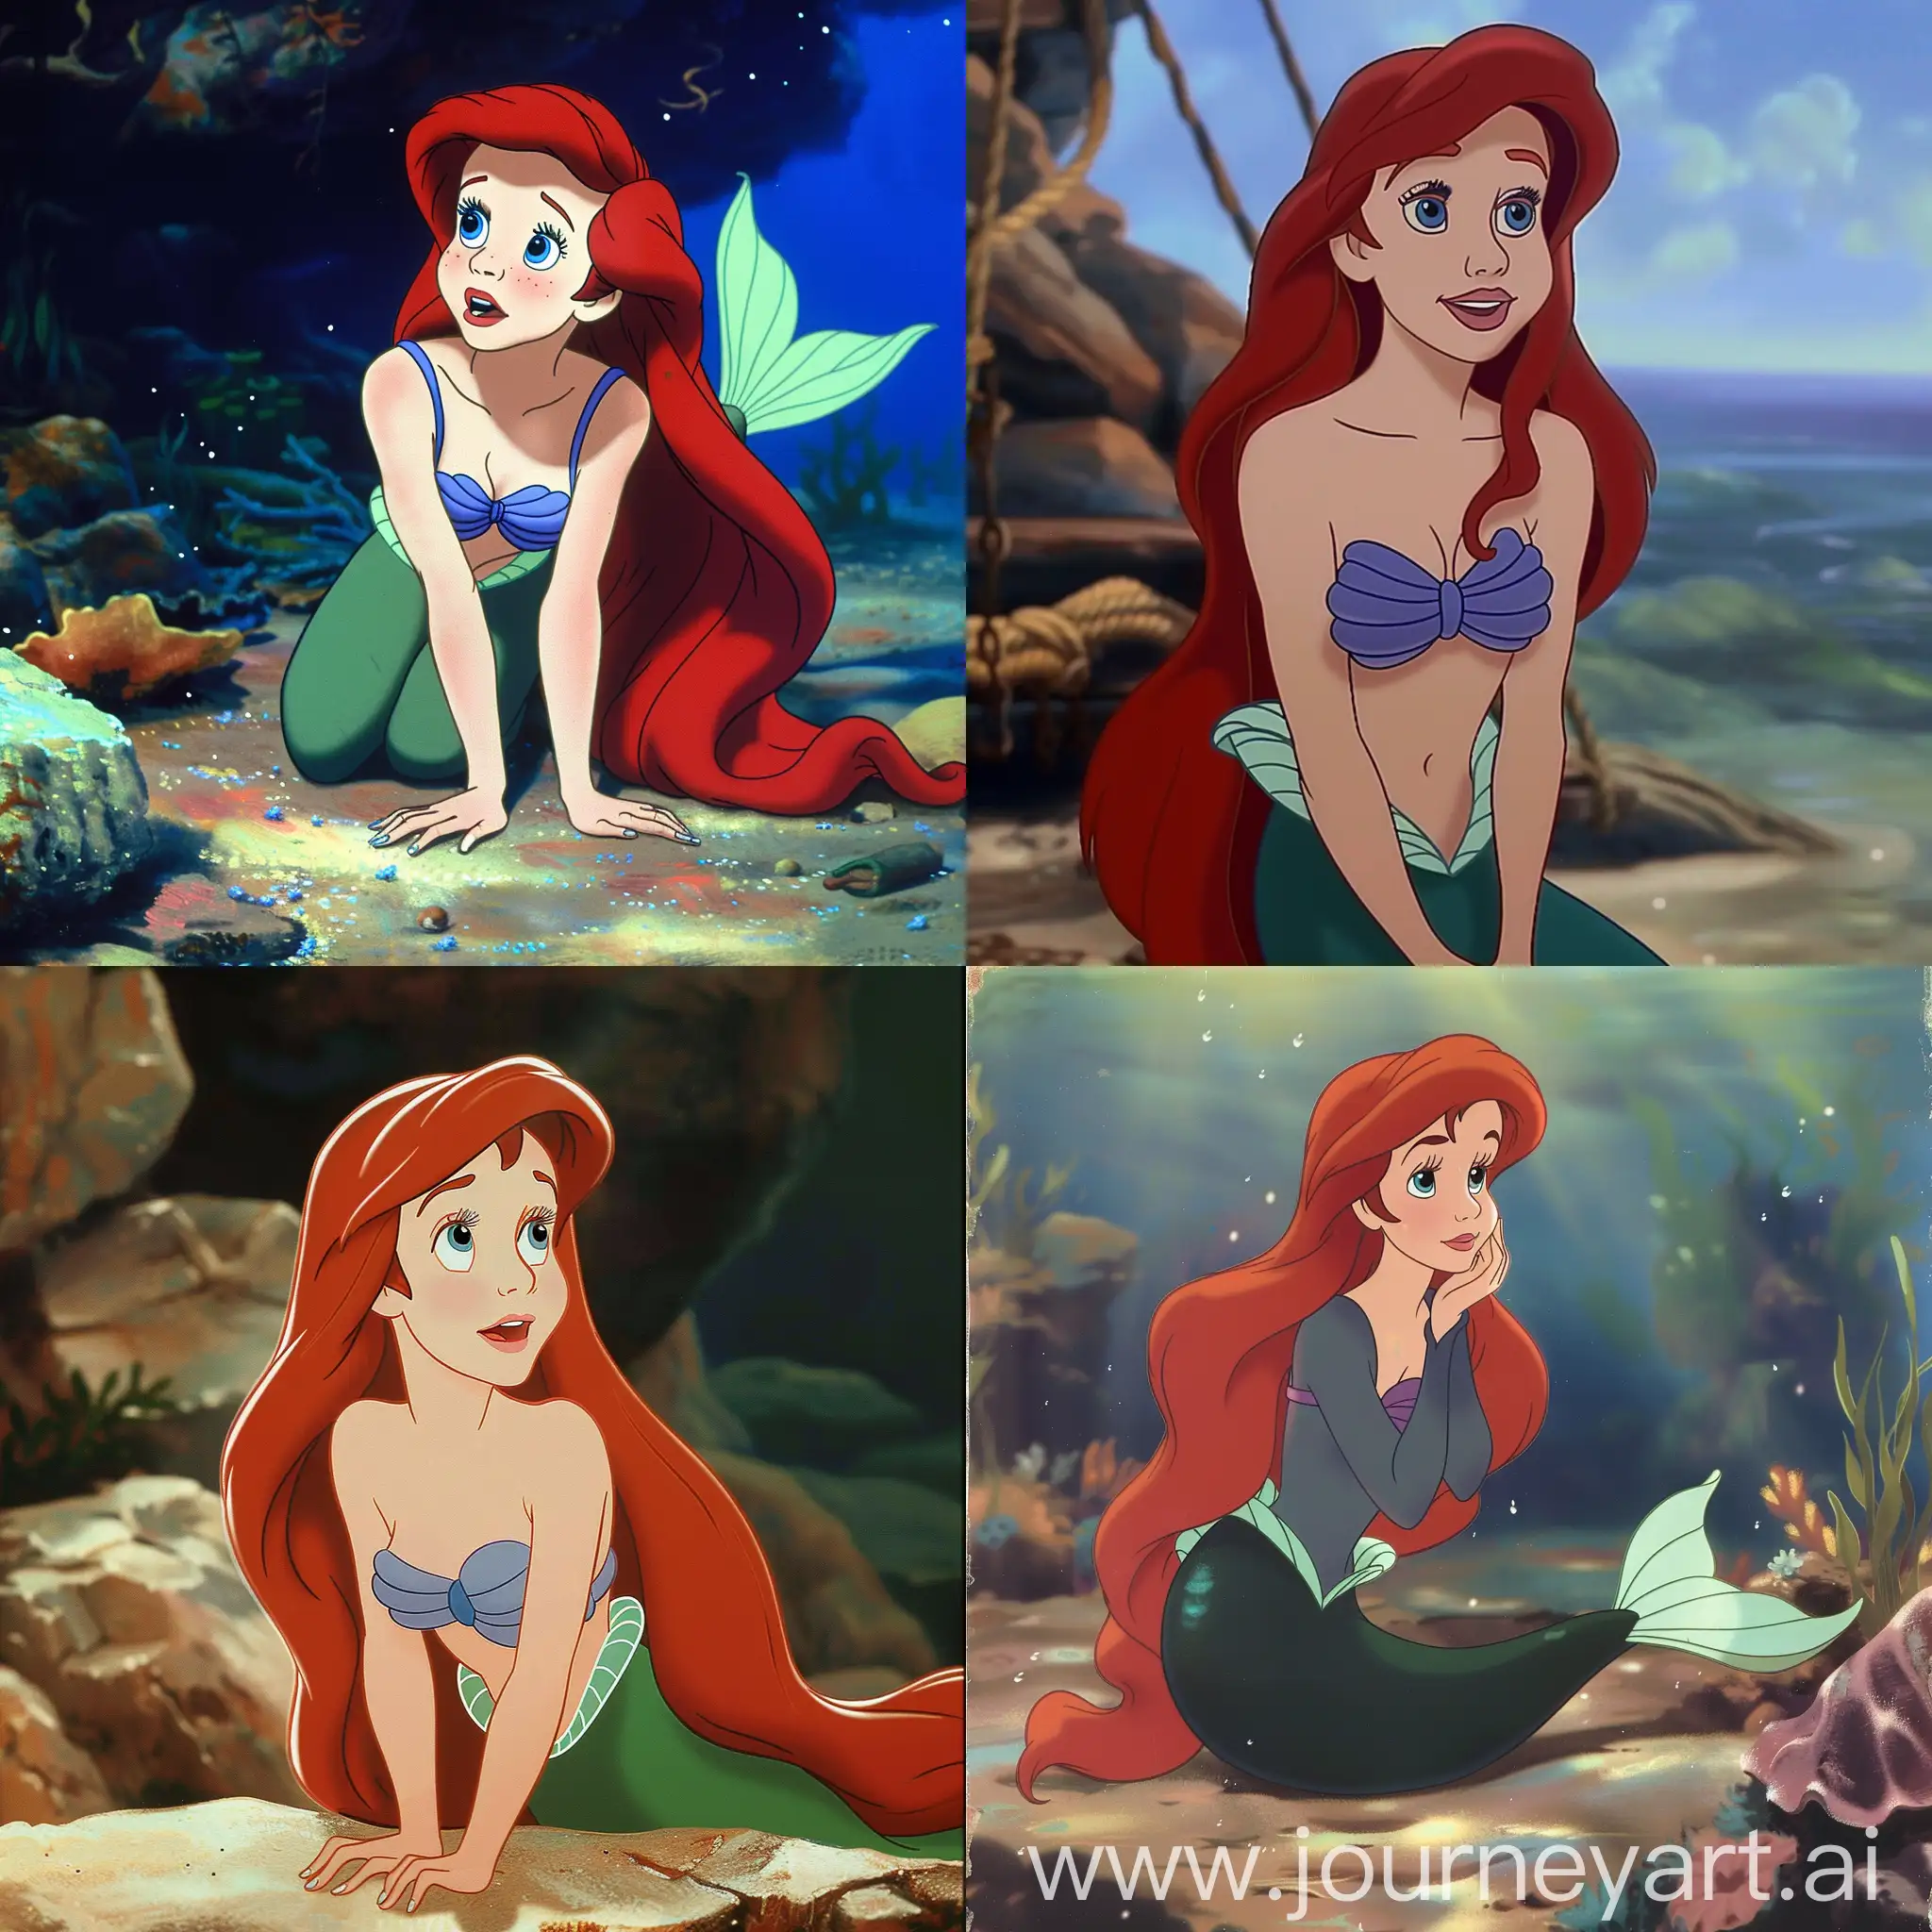 Scene from disney classic animation Ariel as a Halle bailley